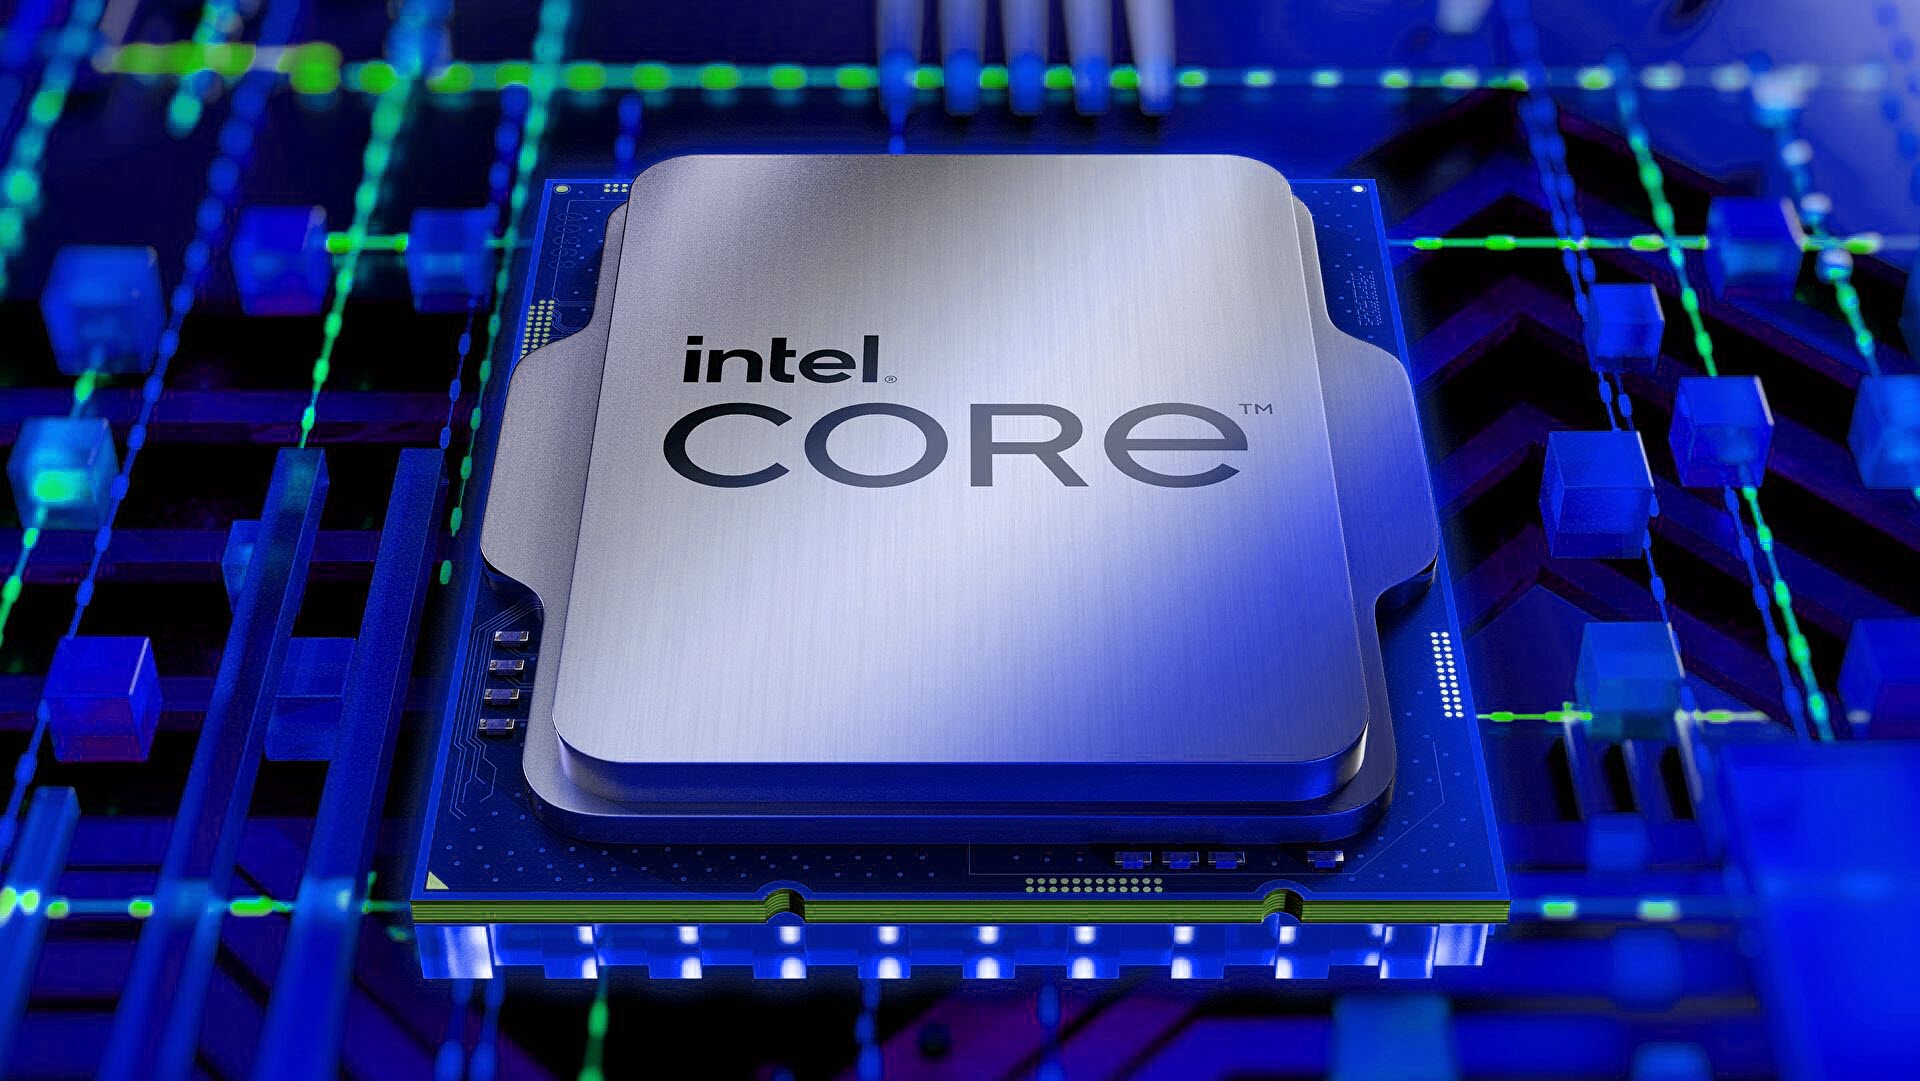 Full lineup of Intel’s 13th generation Raptor Lake desktop CPUs leaks, flagship Core i9-13900K with 24 cores and 32 threads